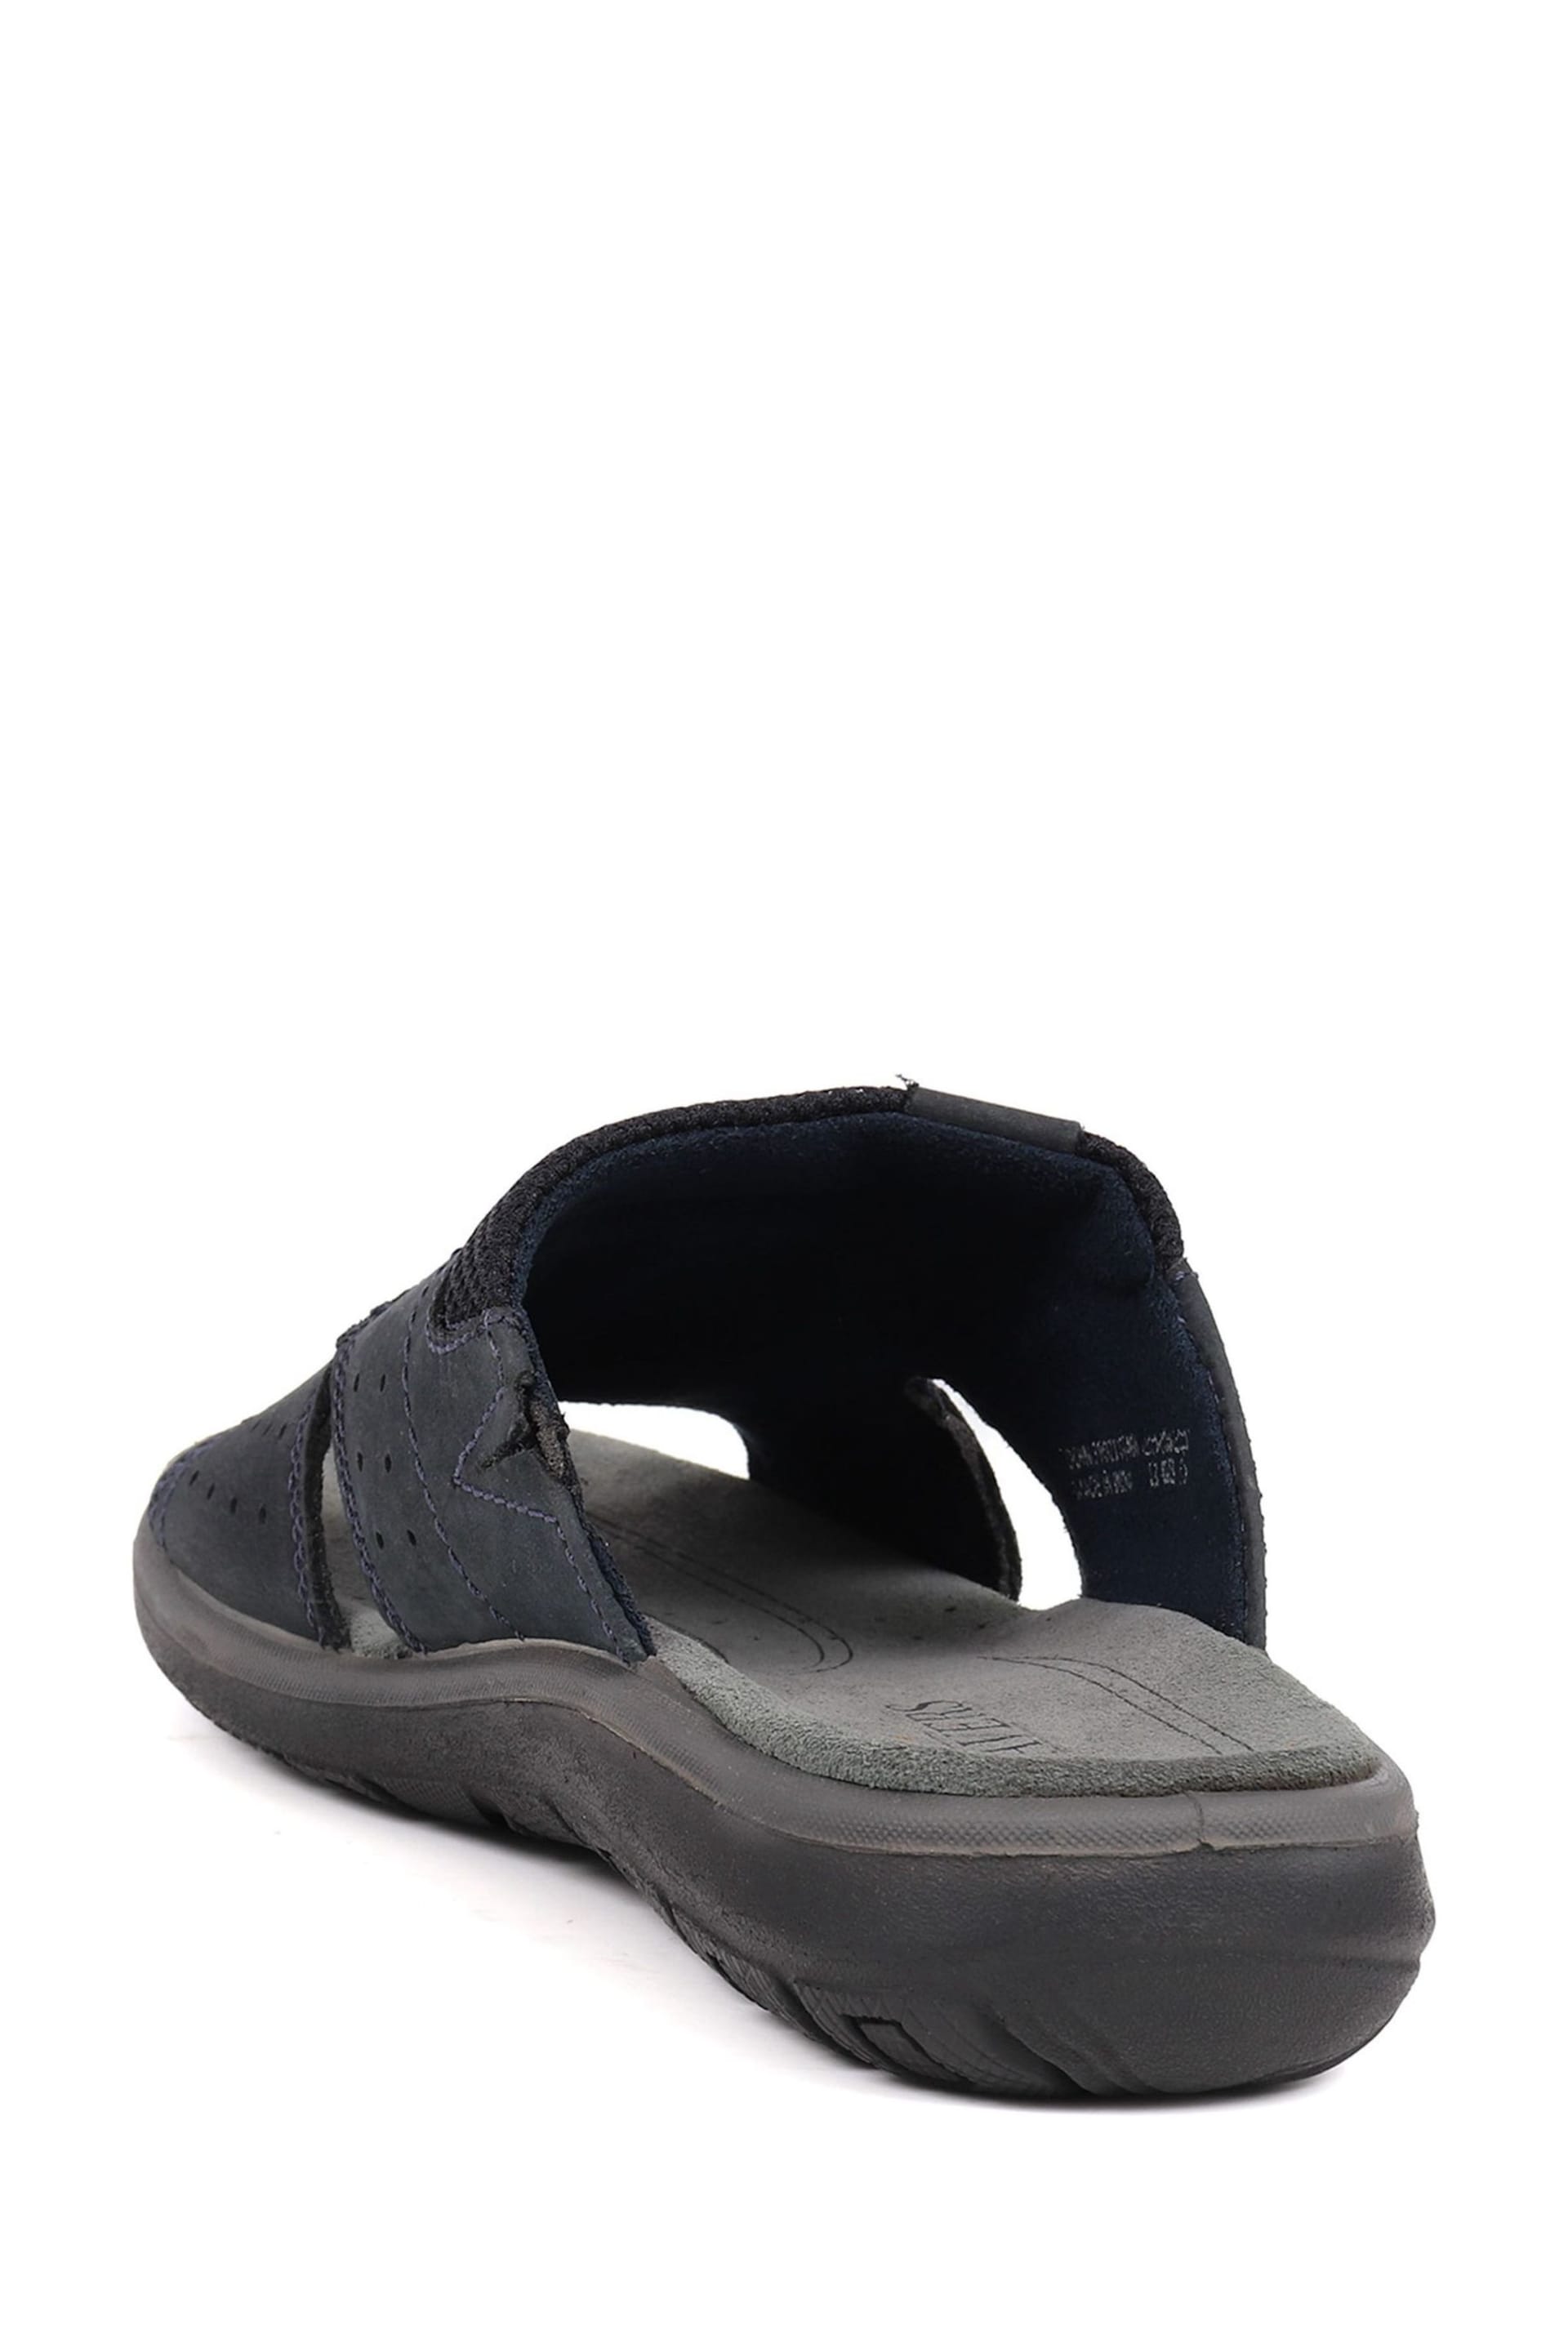 Pavers Blue Leather Mule Sandals - Image 4 of 5